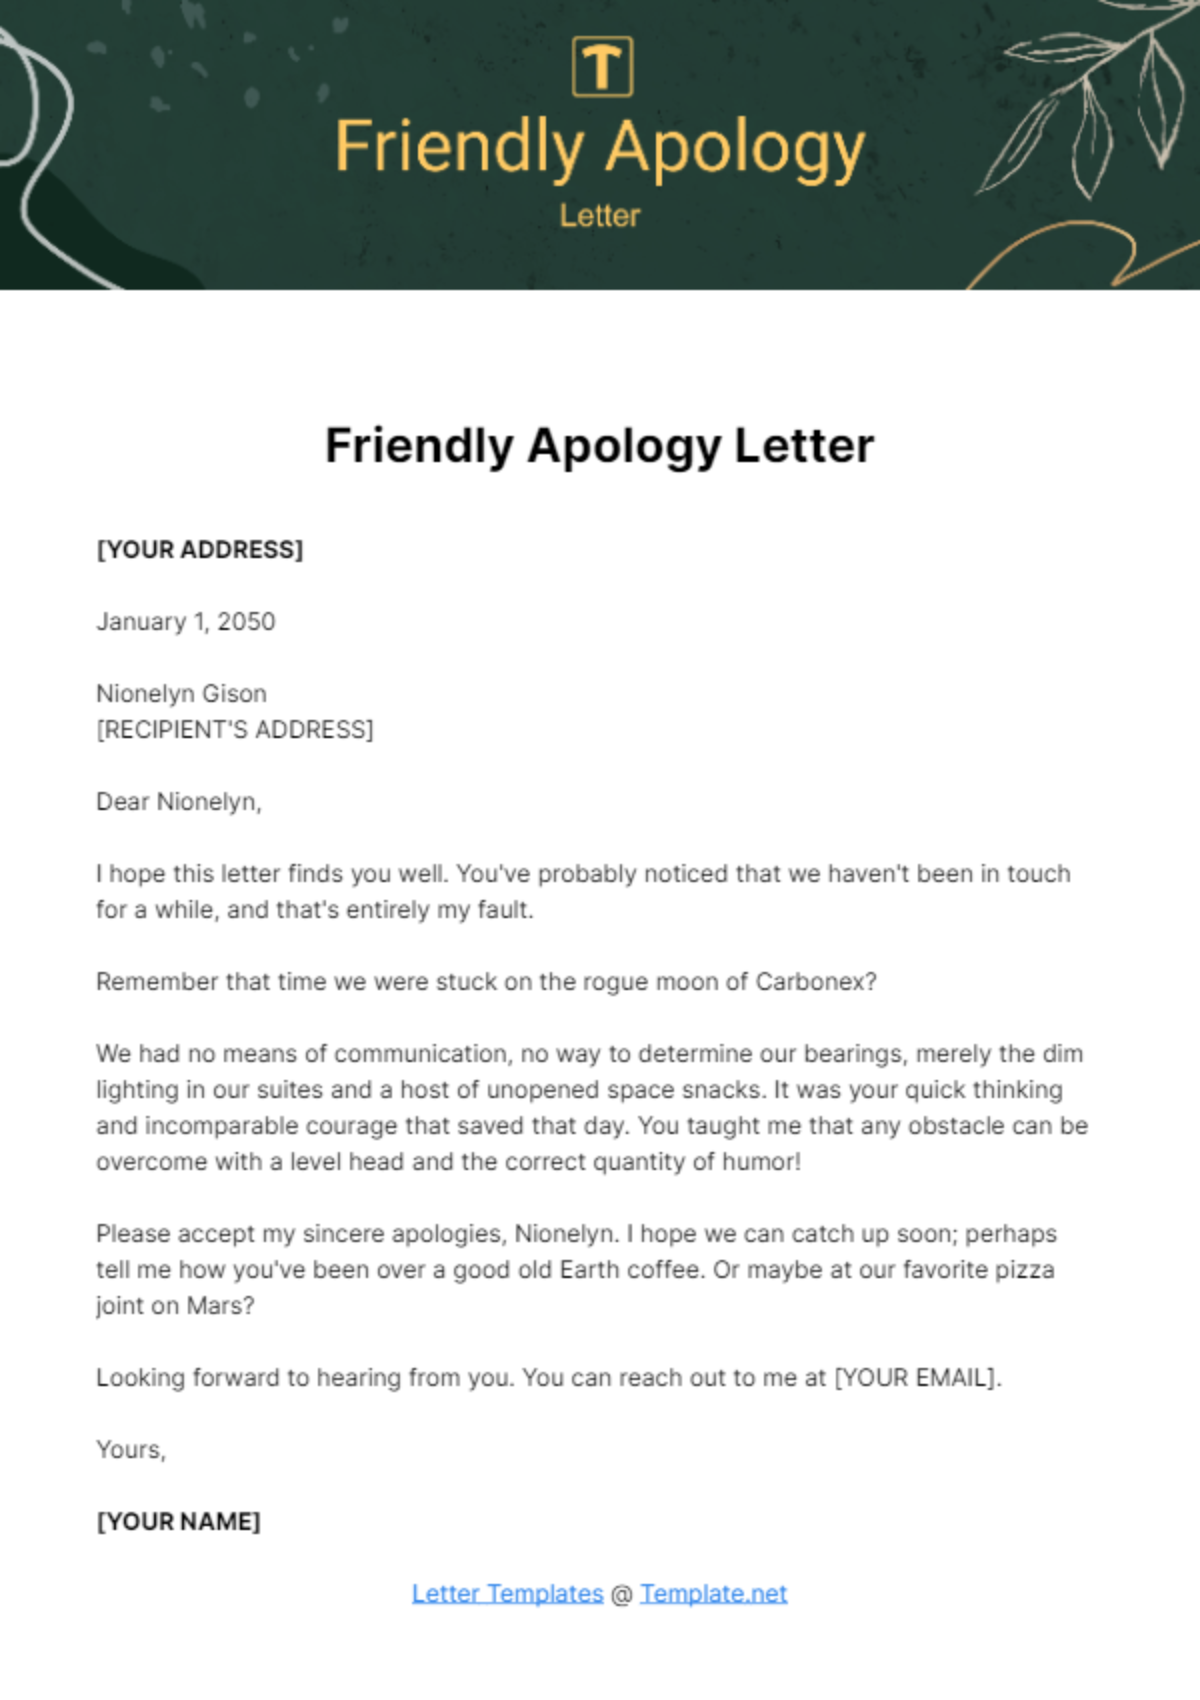 Friendly Apology Letter Template